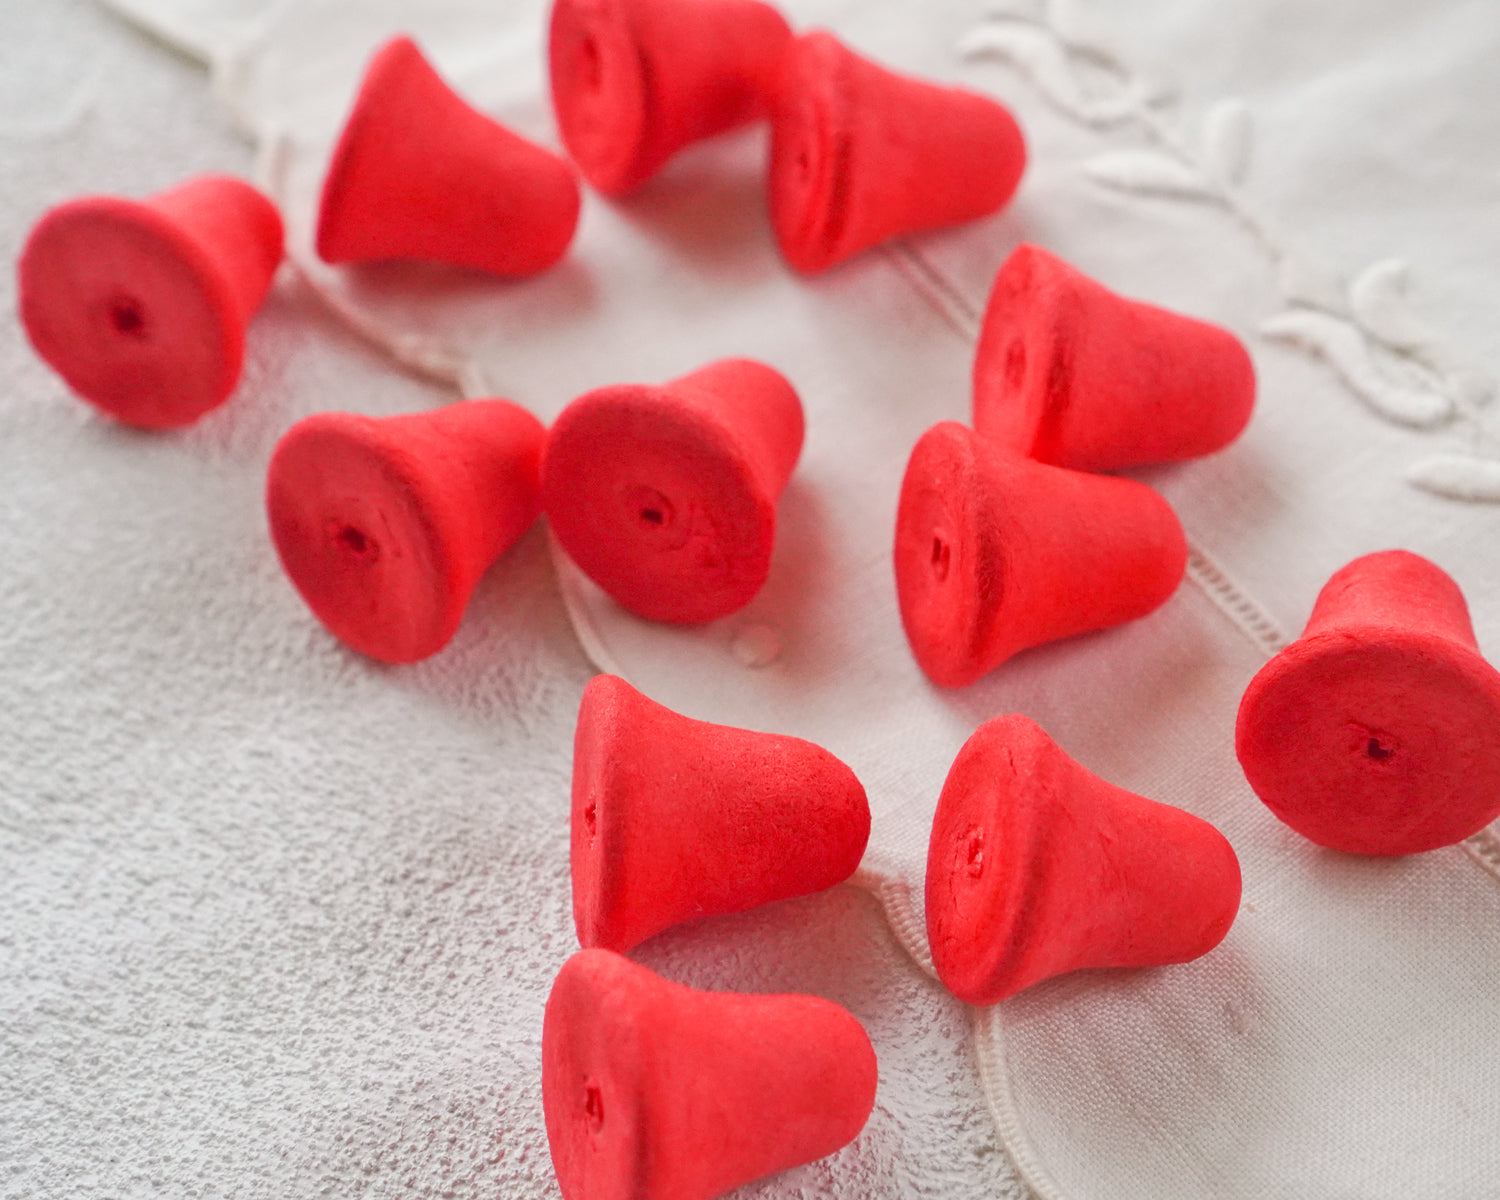 Small Red Spun Cotton Bells - 24mm Vintage-Style Craft Shapes, 24 Pcs.